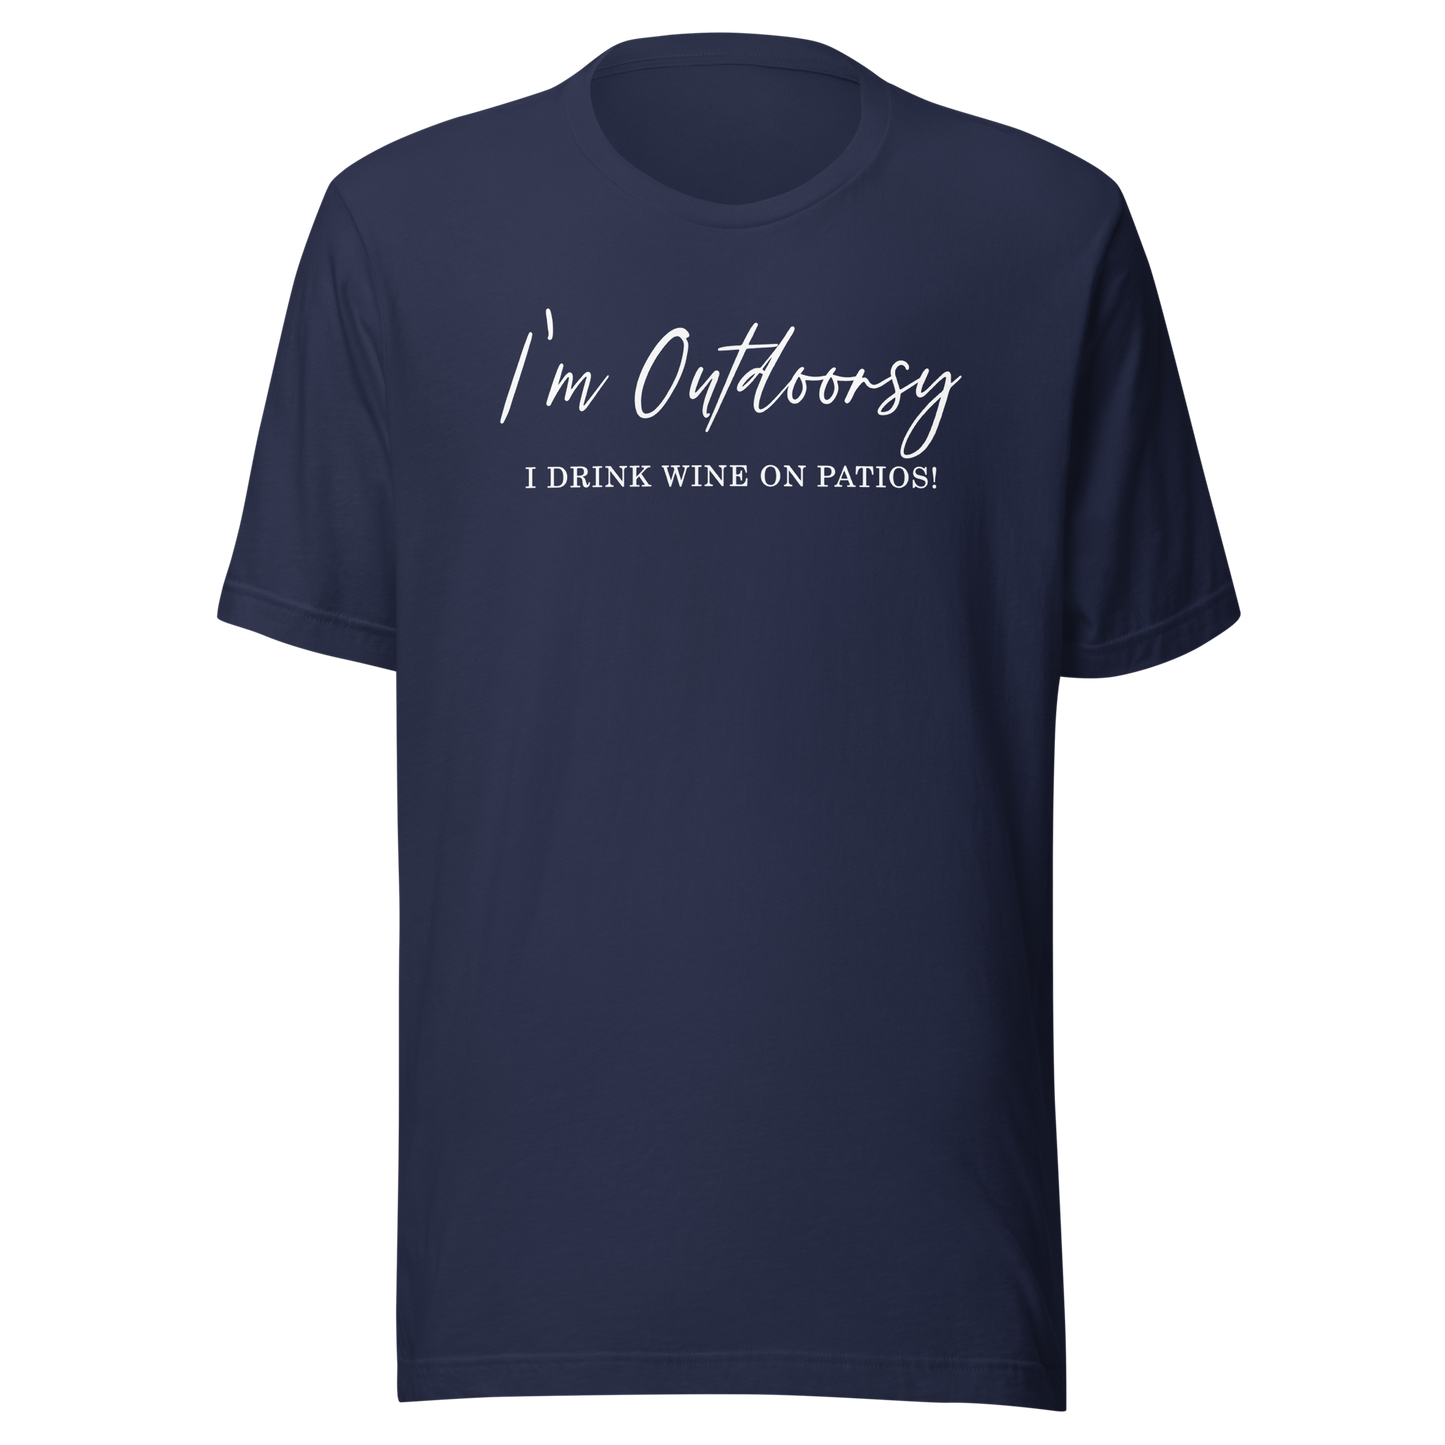 Shirt of the Month - Outdoorsy AKA I Drink On Patios T-Shirt